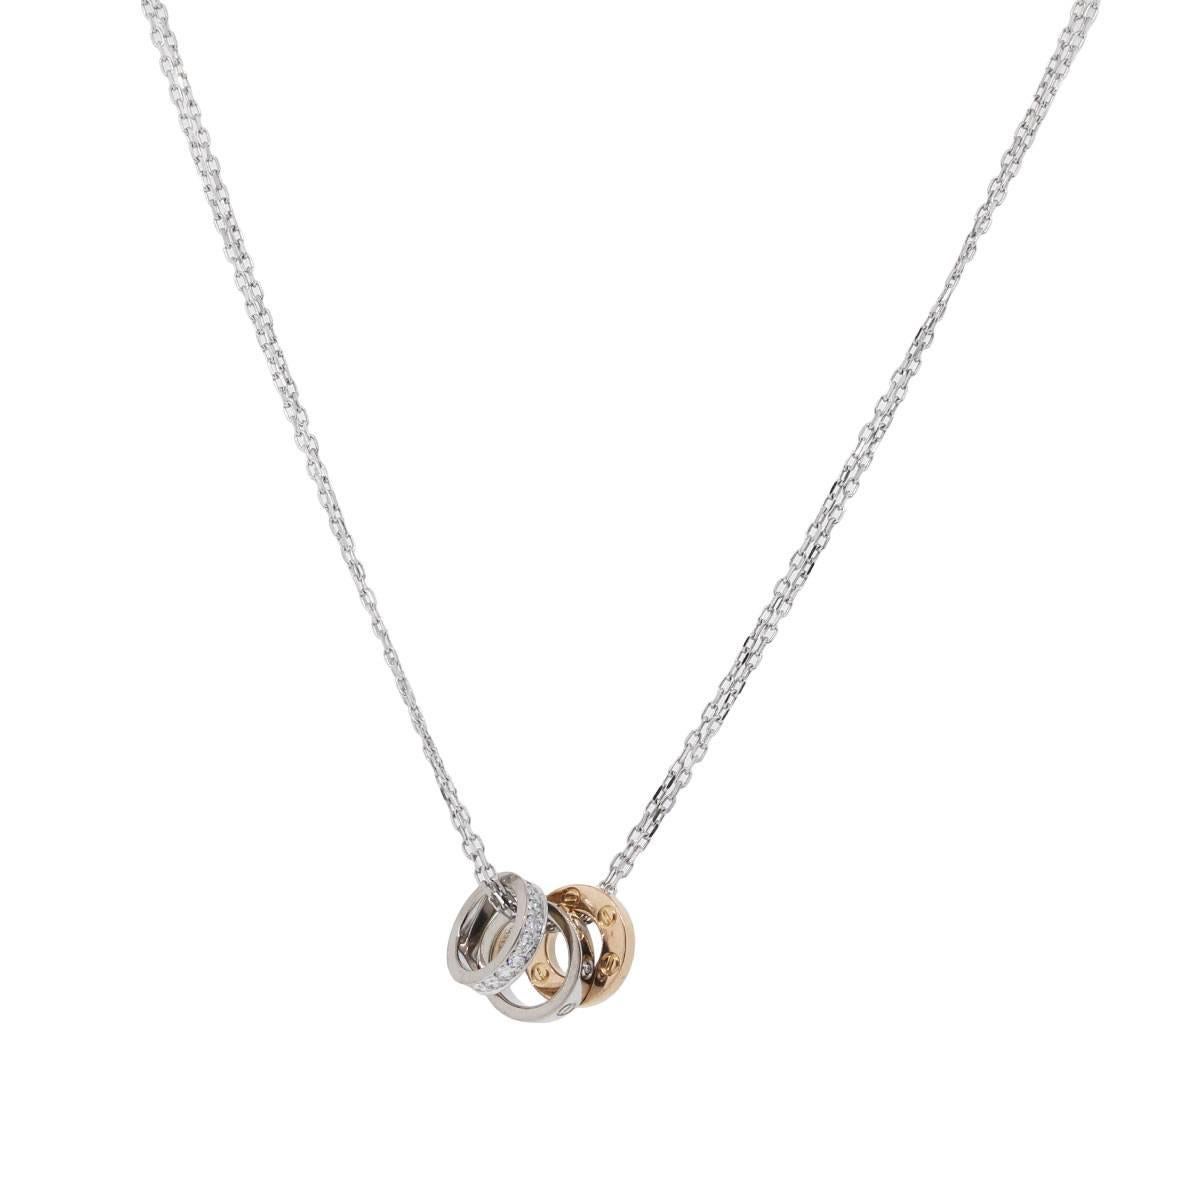 Designer: Cartier
Material: 18k white and rose gold
Diamond Details: Approximately 0.25ctw of round brilliant diamonds. Diamonds are E/F in Color and VS in Clarity
Necklace Length: 16